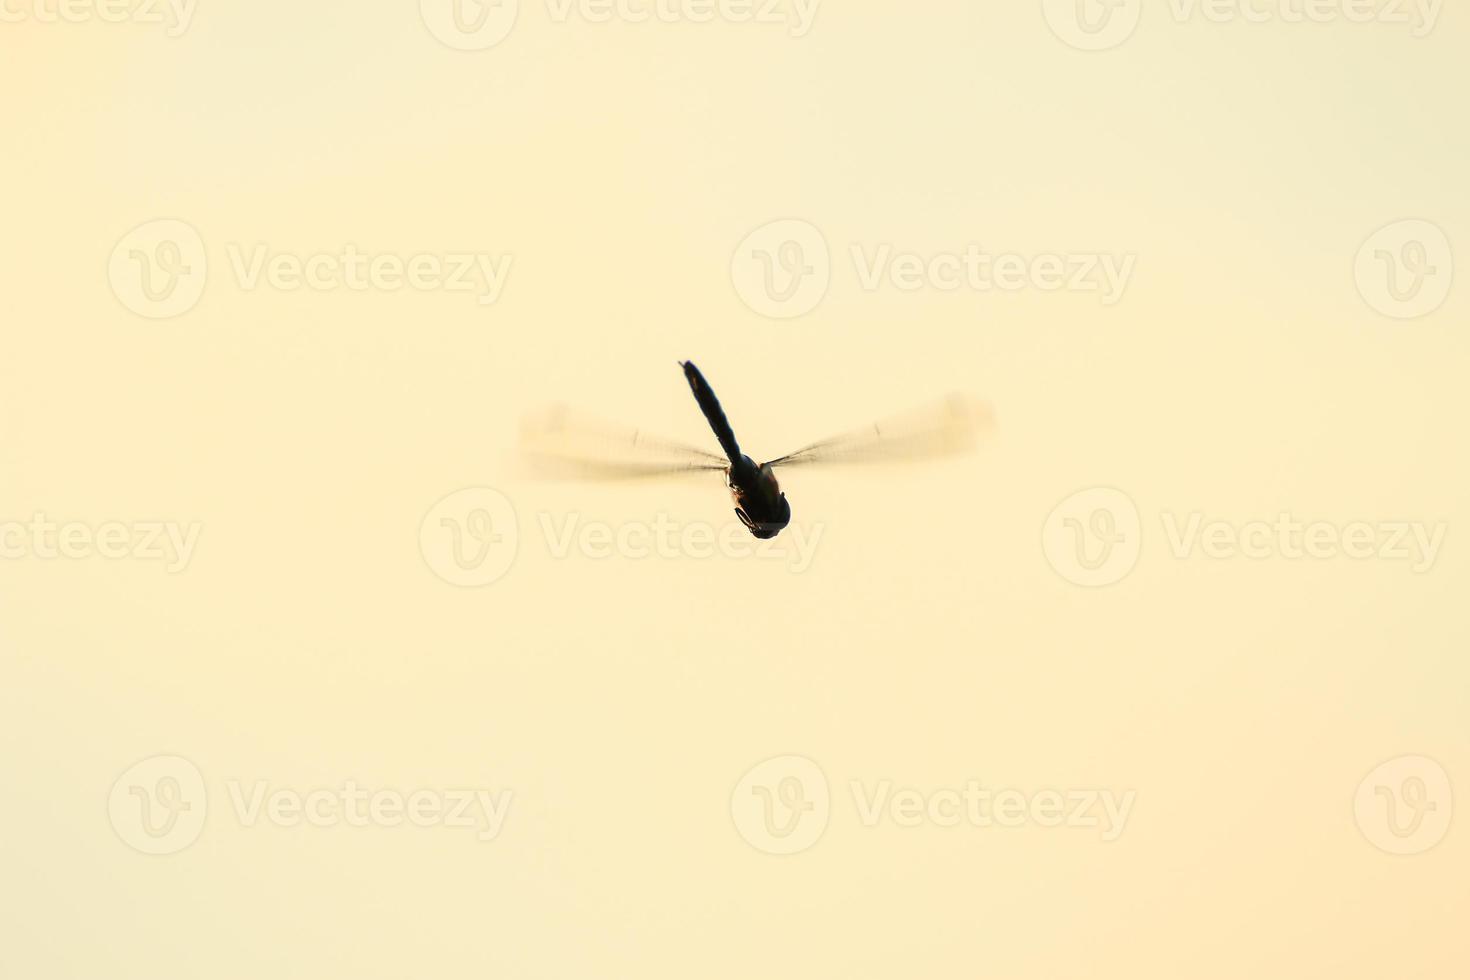 A wandering glider dragonfly in flight near the water photo